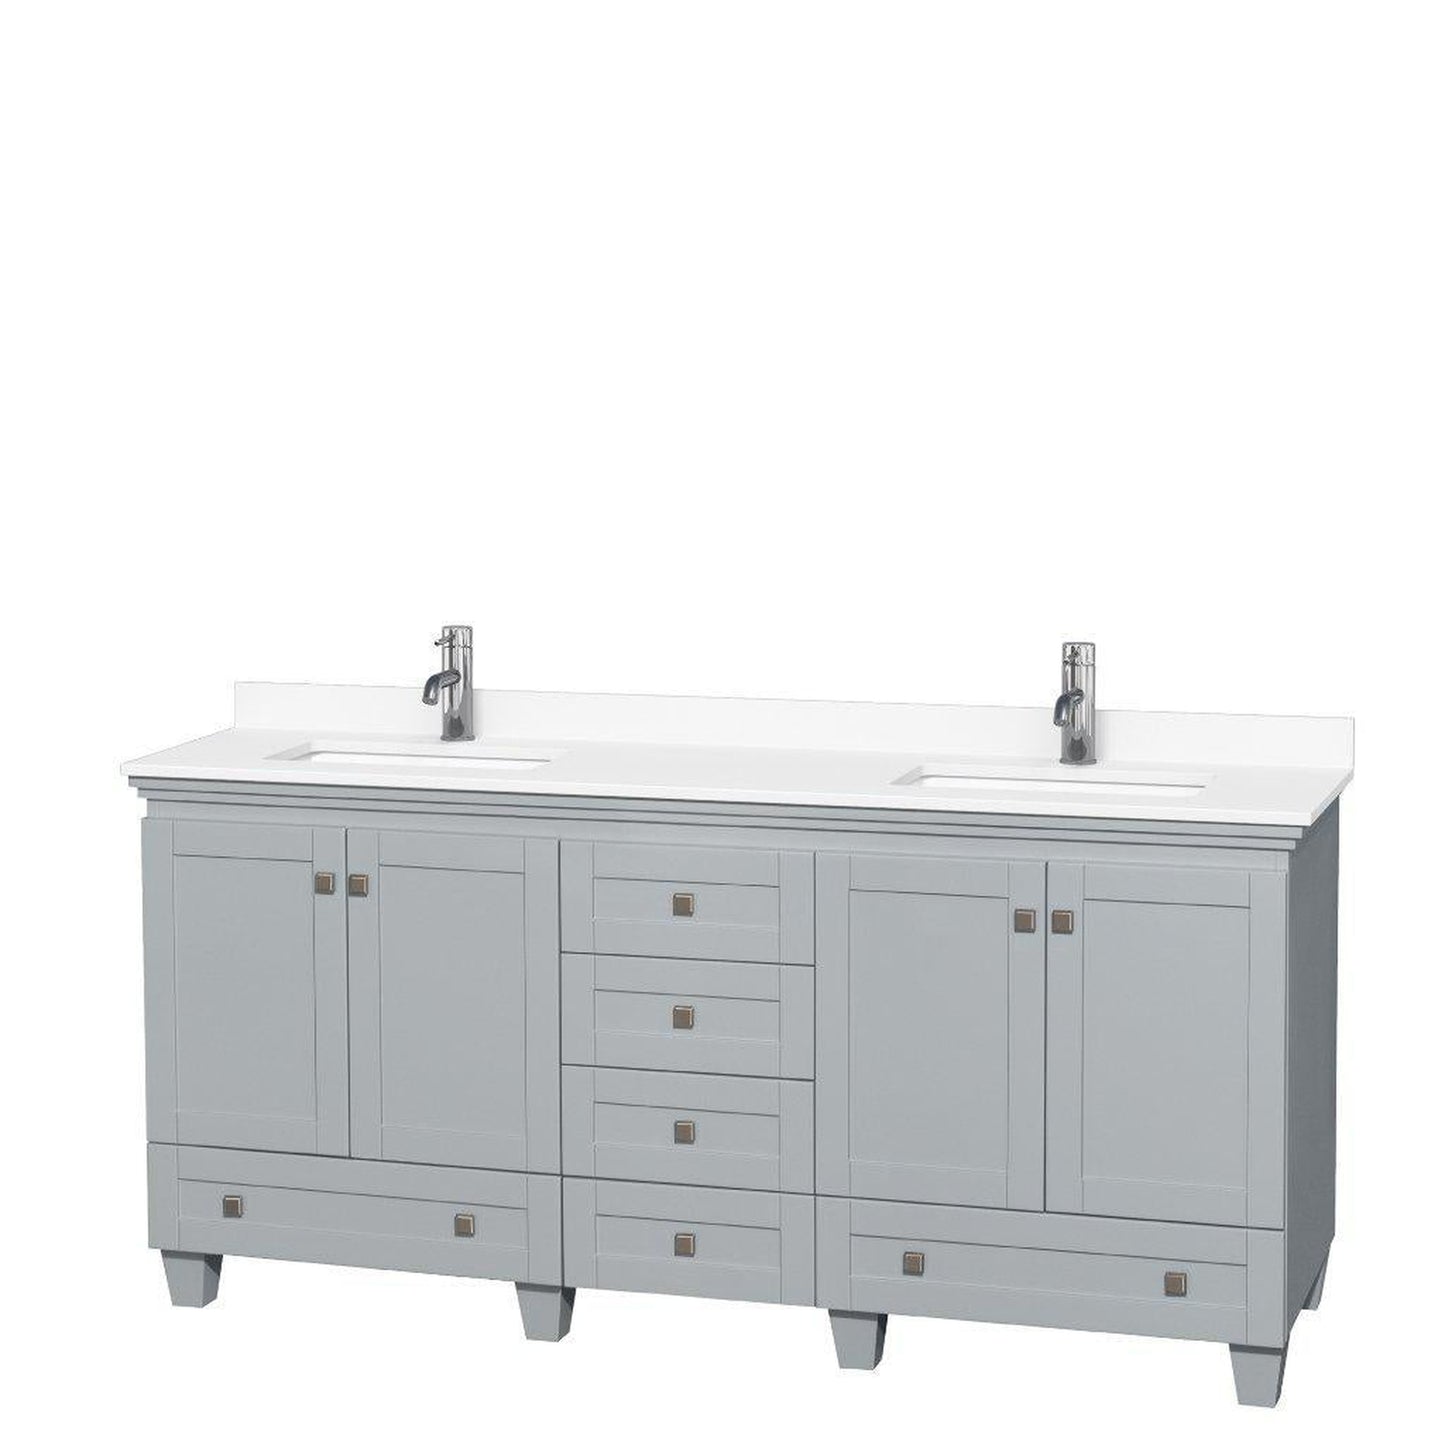 Wyndham Collection Acclaim 72" Double Bathroom Oyster Gray Vanity With White Cultured Marble Countertop And Undermount Square Sinks